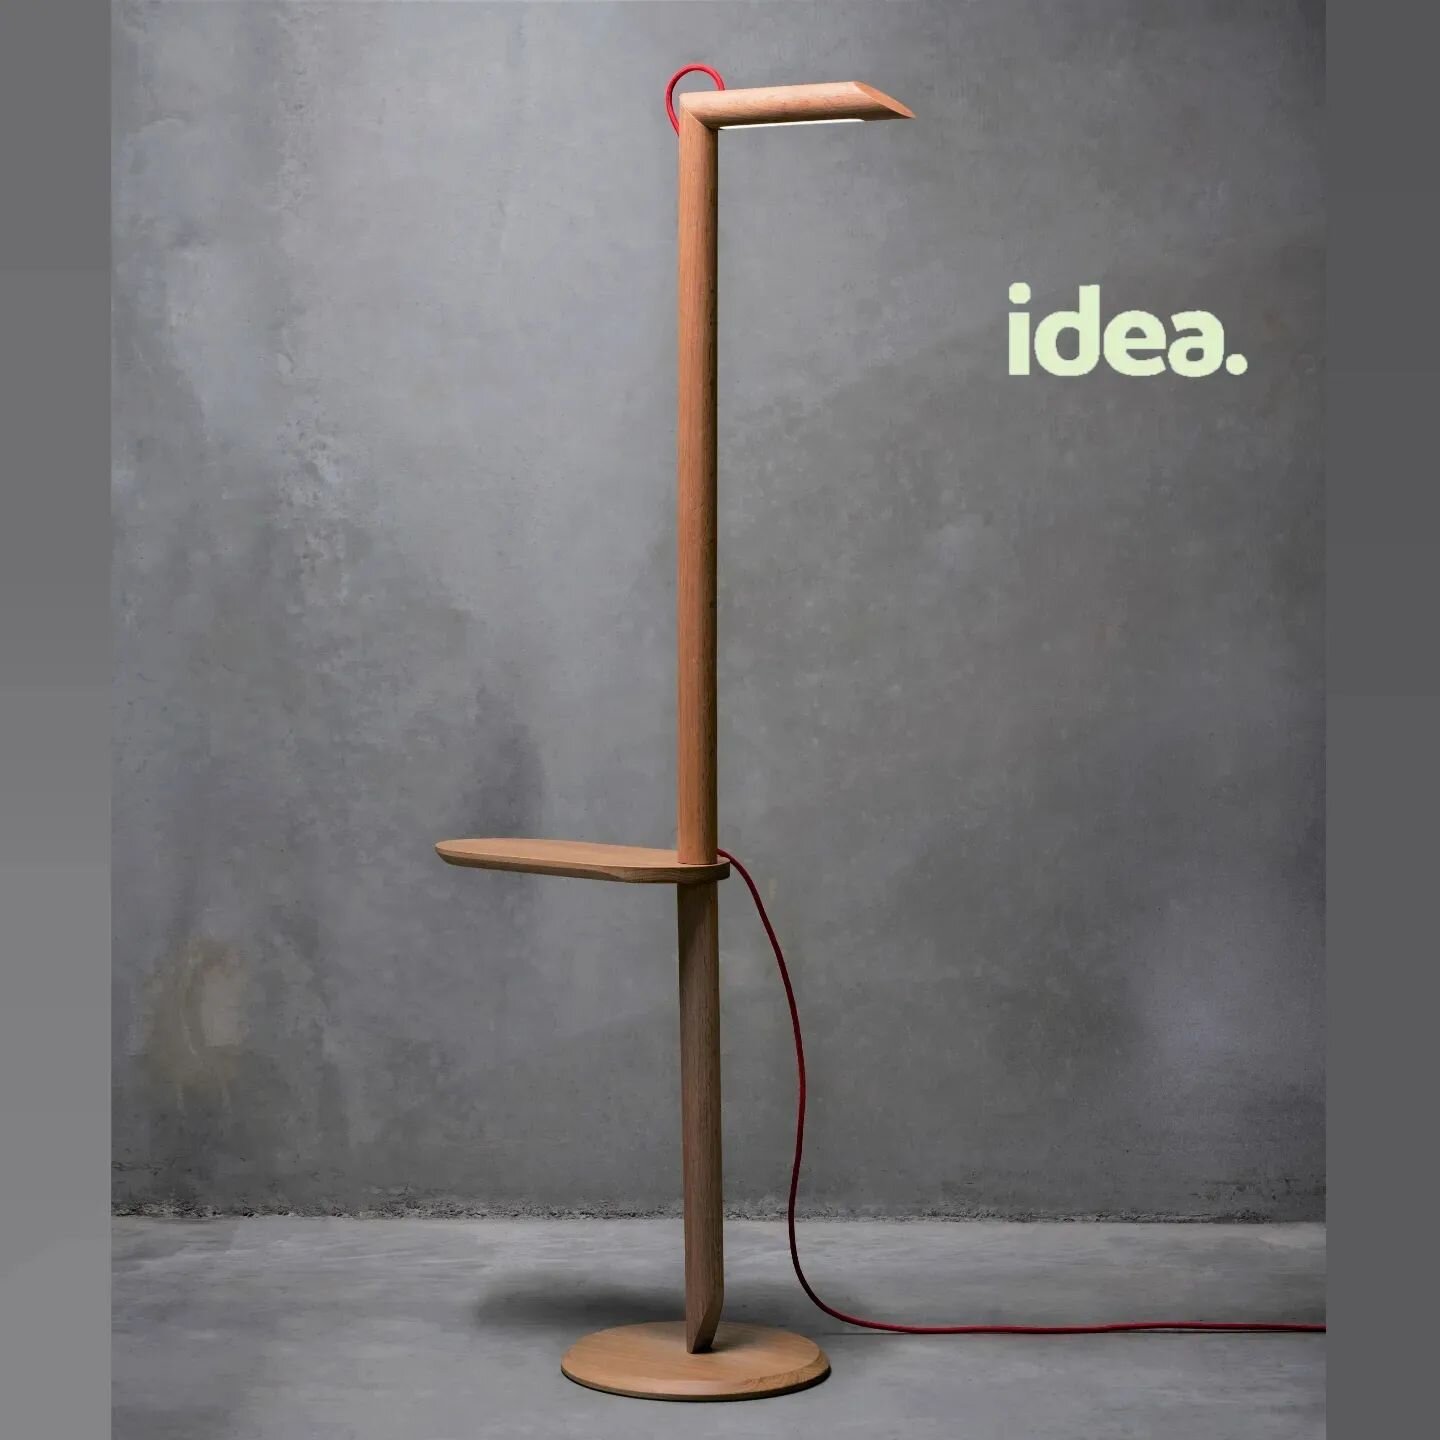 Introducing FLAMINGO!

Our new floorlampsidetable has been nominated as a finalist in the 2022 IDEA Awards in the Object Furniture &amp; Lighting category (Rising)!

Thanks for the nomination @ausdesignreview and good luck to all contestants for the 